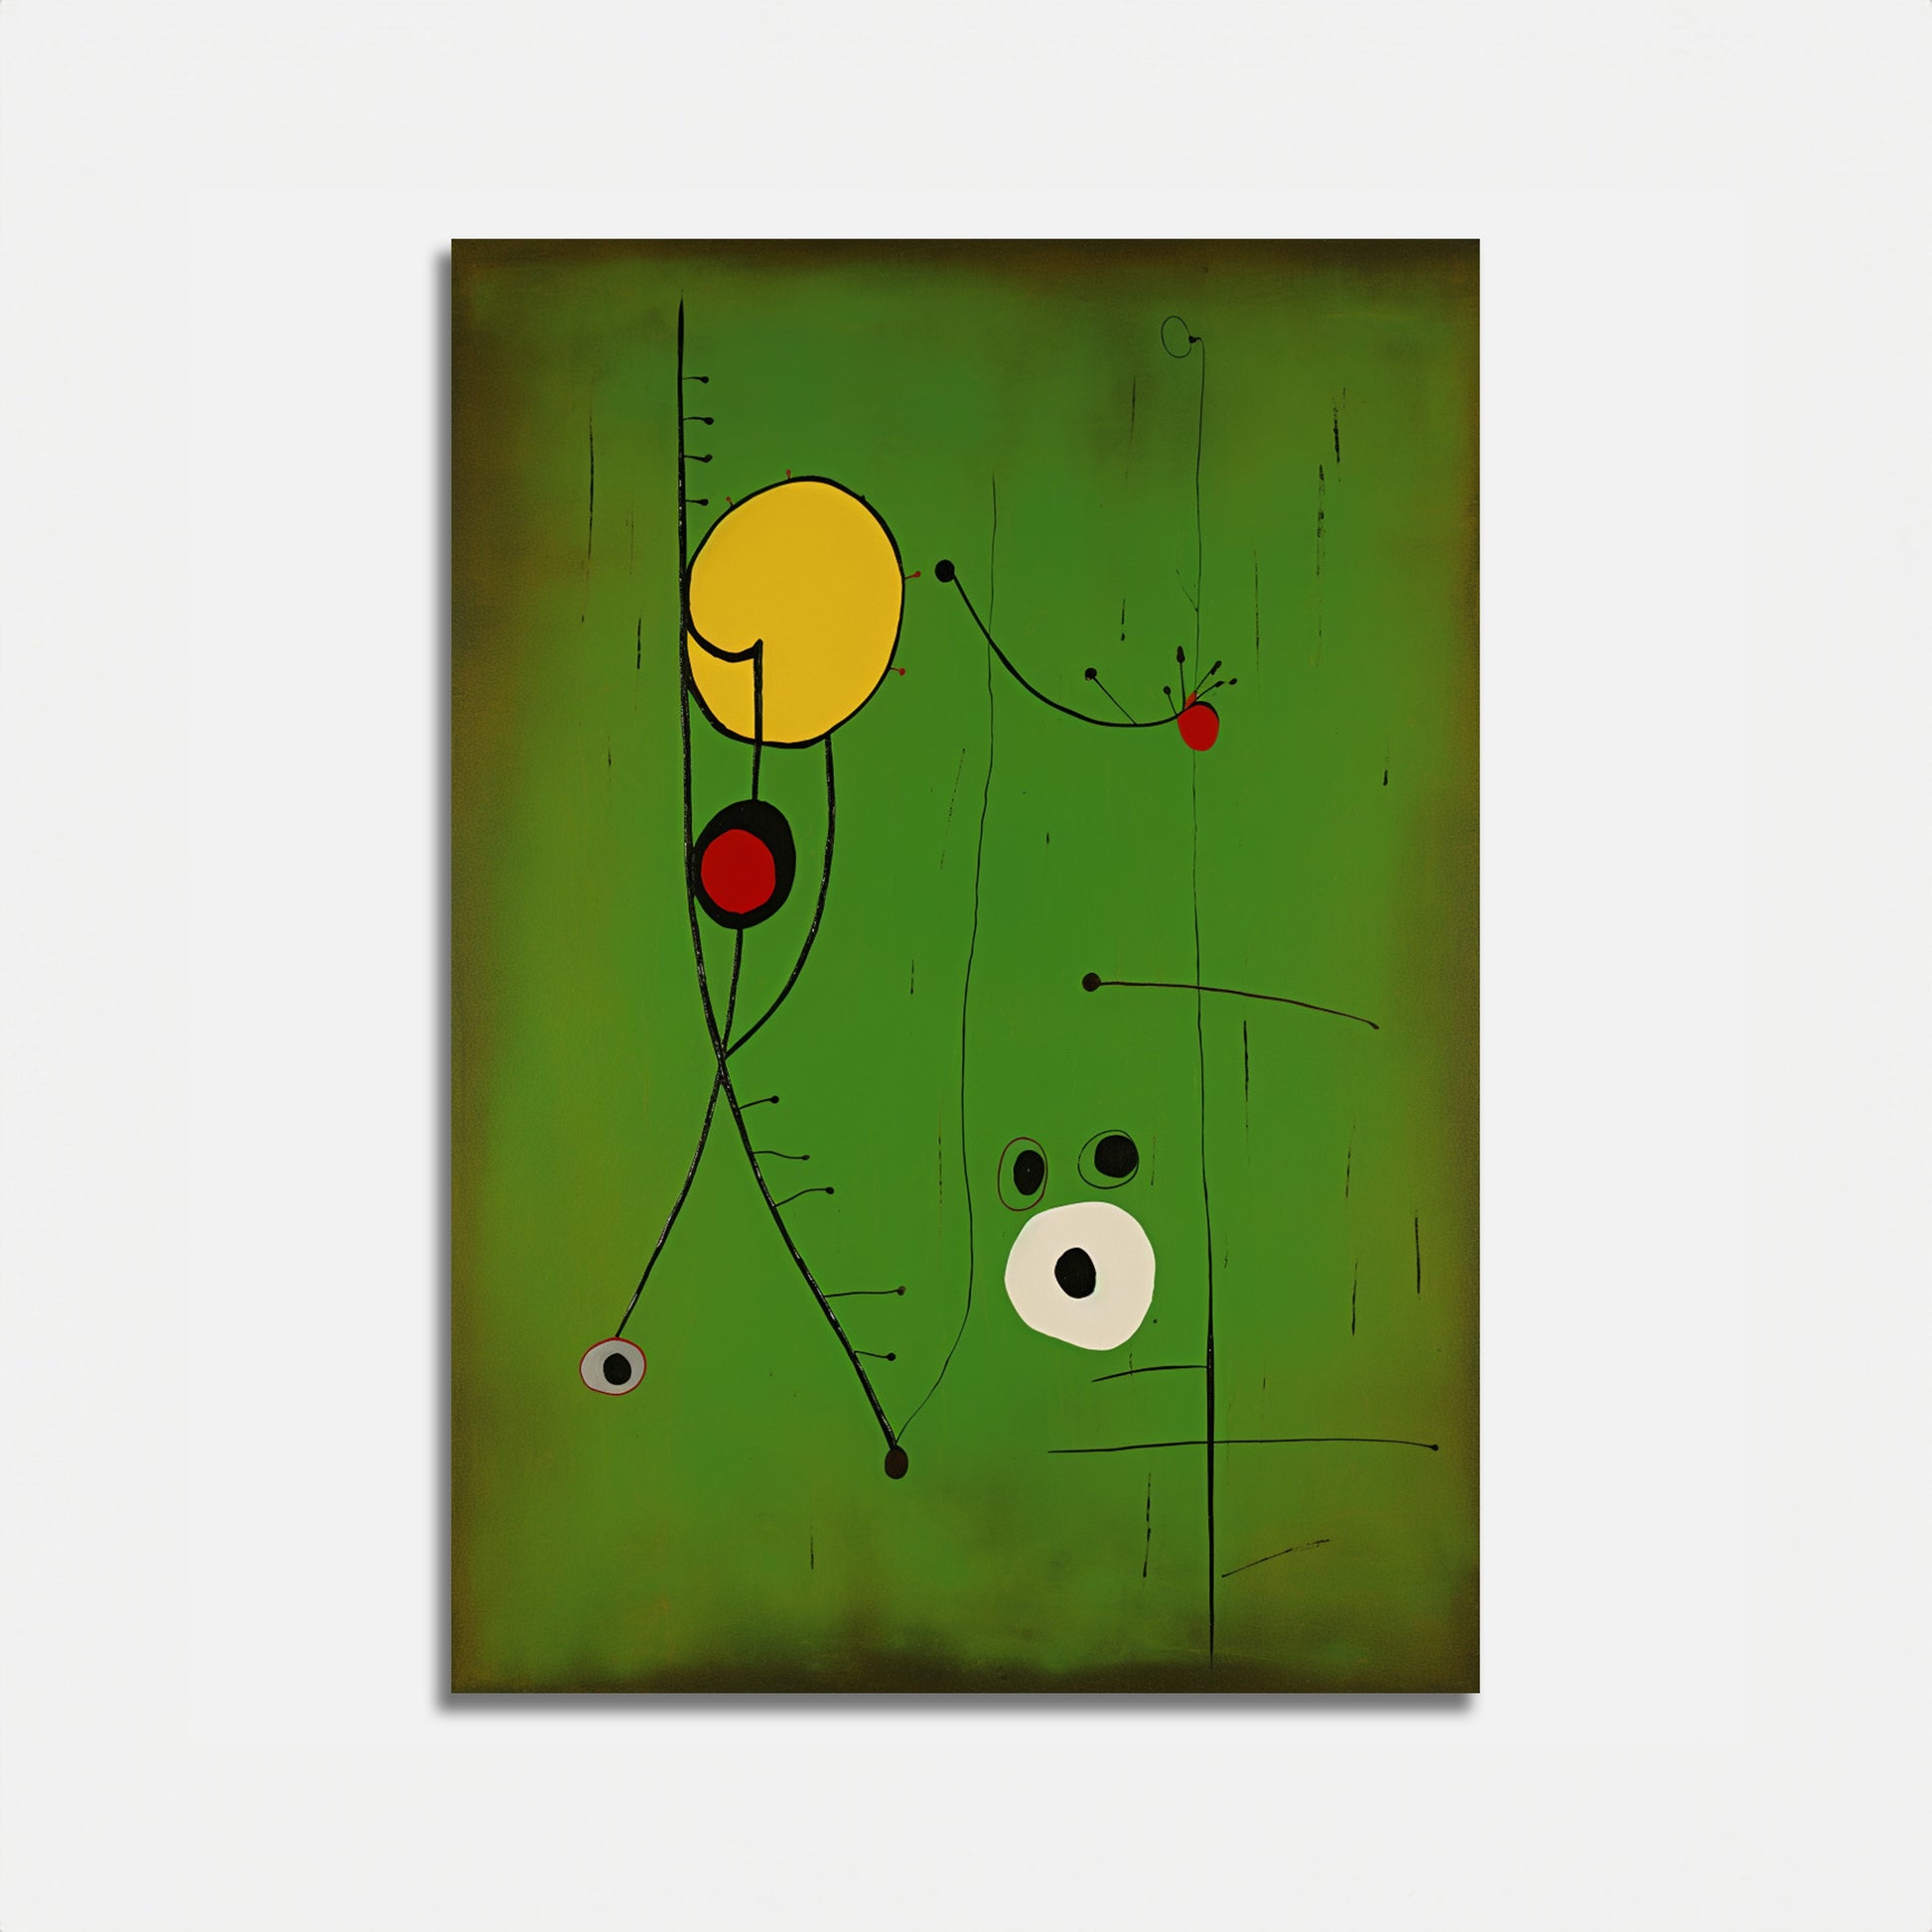 Abstract painting with geometric shapes and lines on a green background.